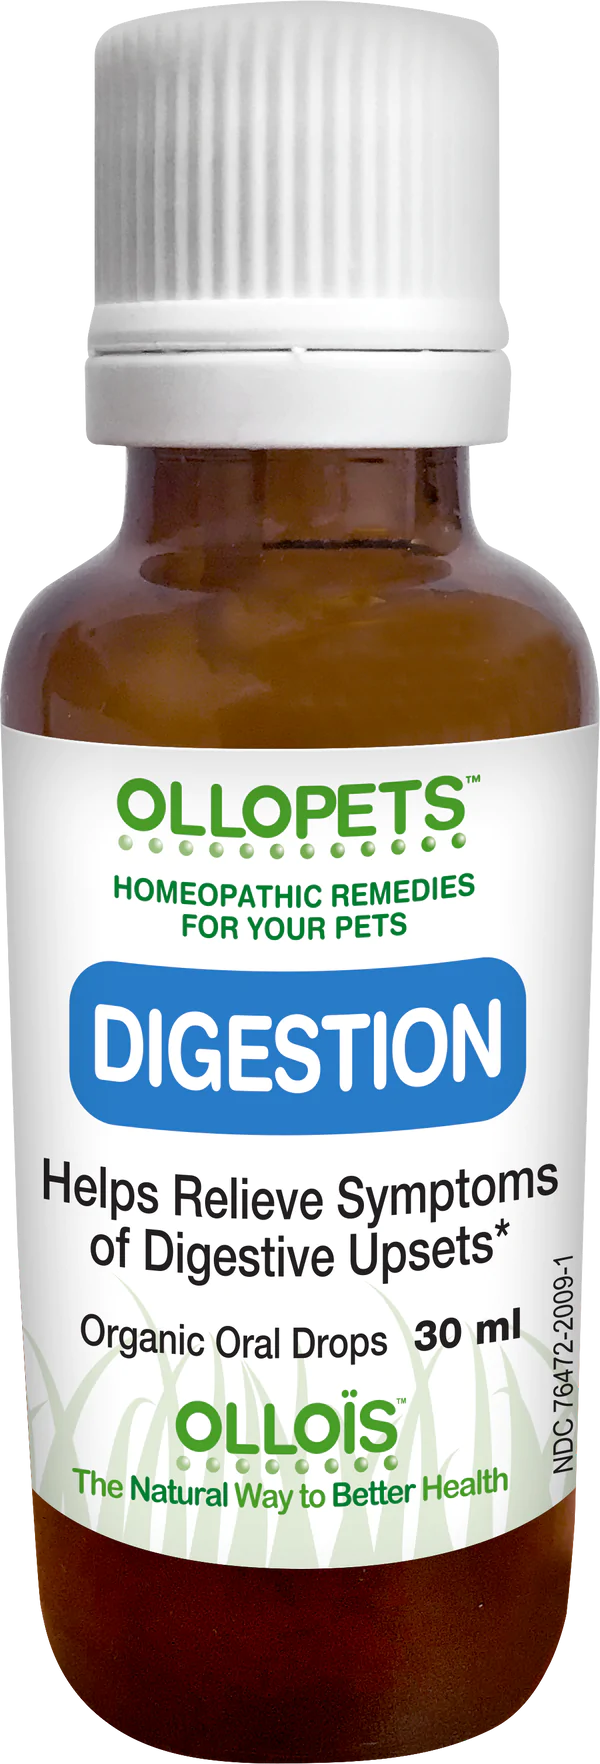 OLLOPETS Digestion